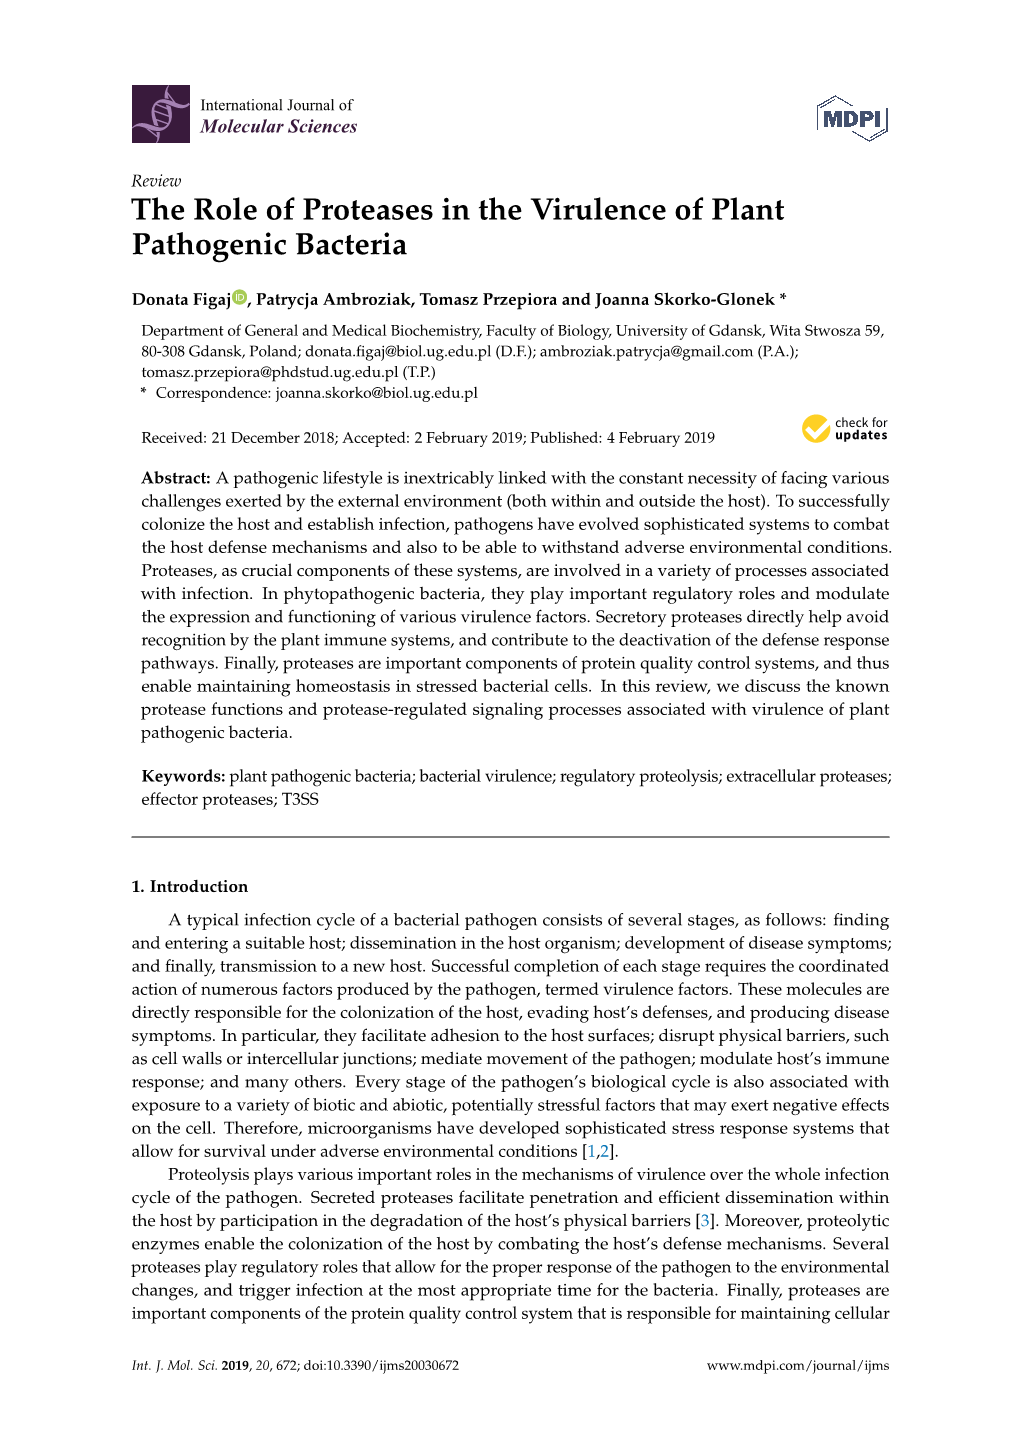 The Role of Proteases in the Virulence of Plant Pathogenic Bacteria